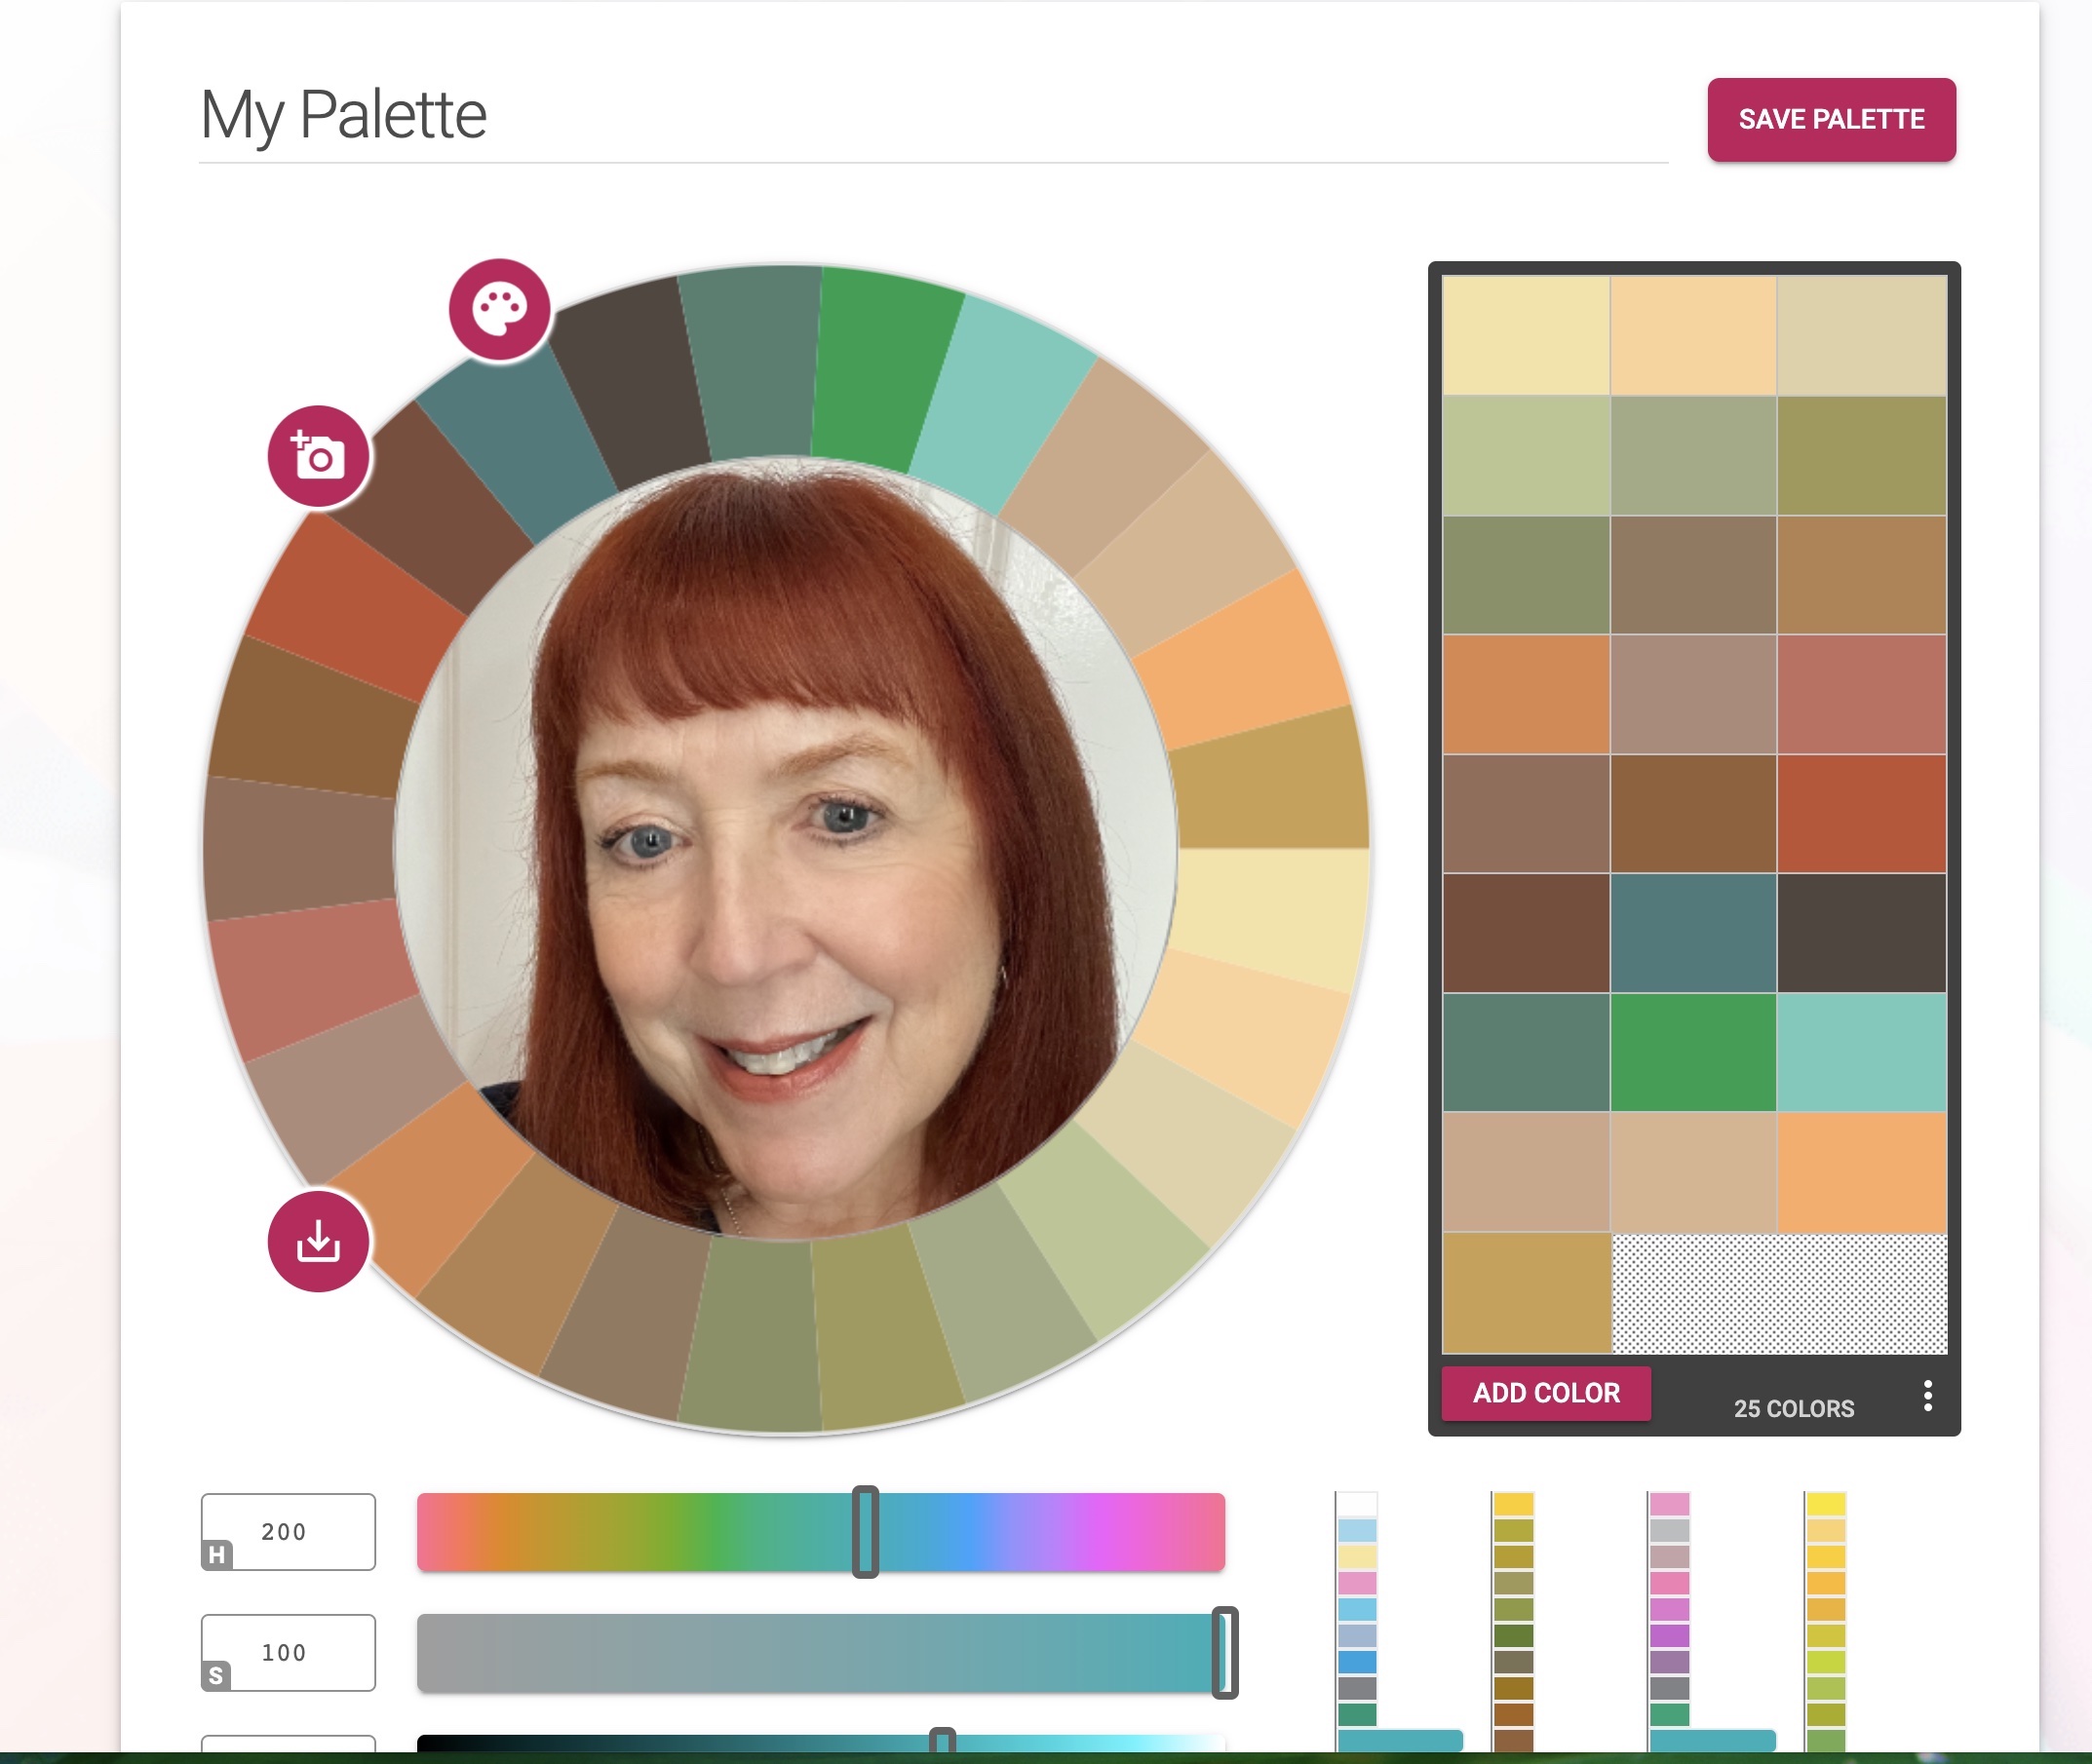 Everything You Need to Know About Professional Color Analysis